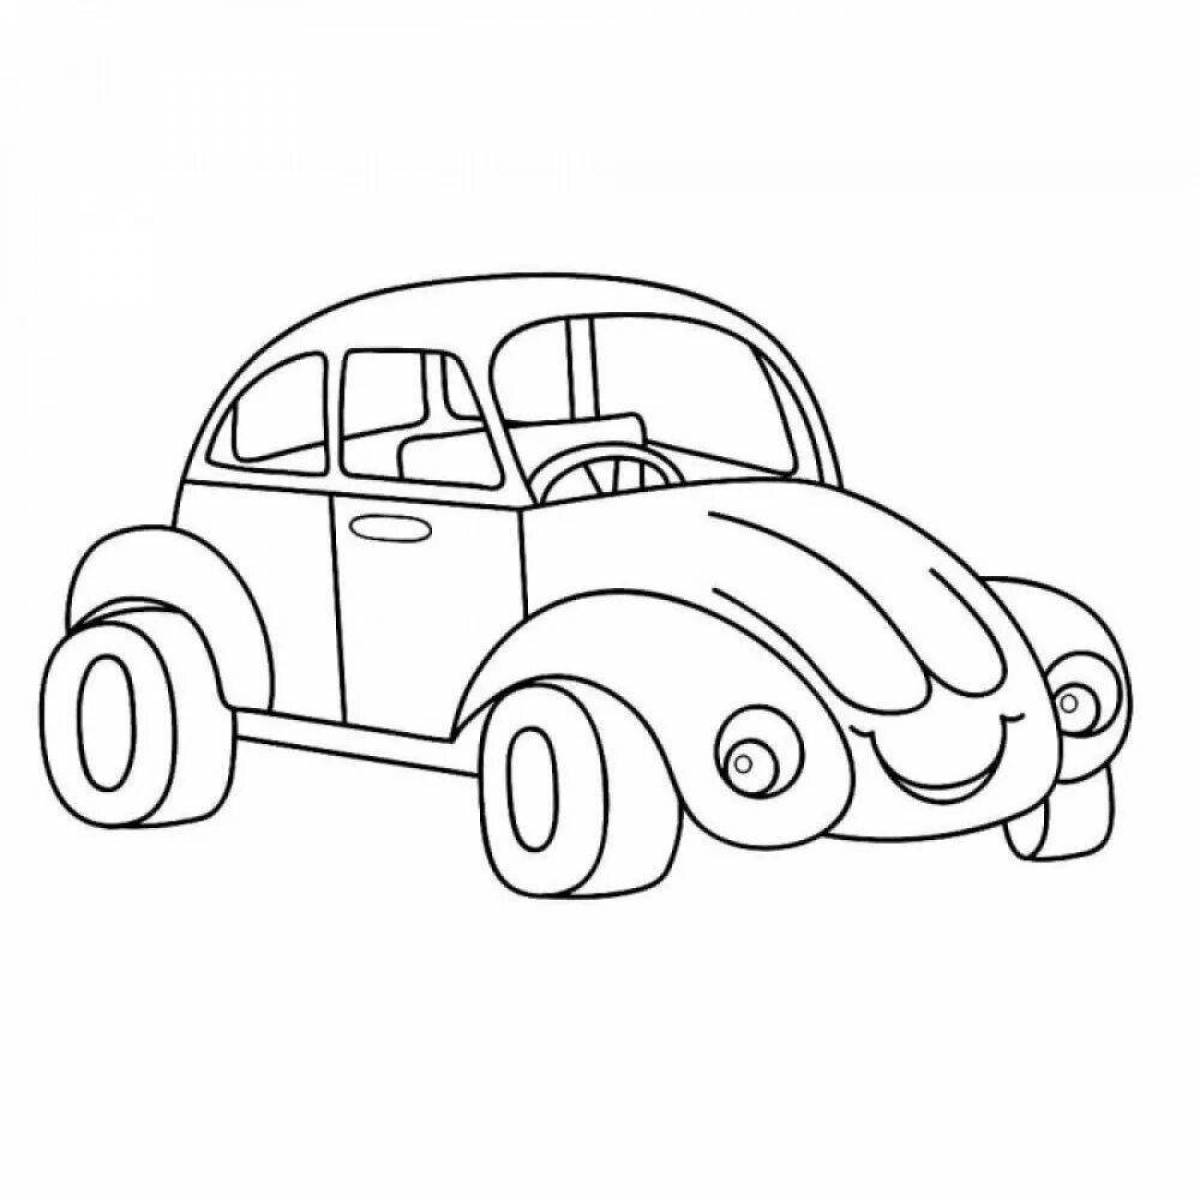 Coloring book shiny toy car